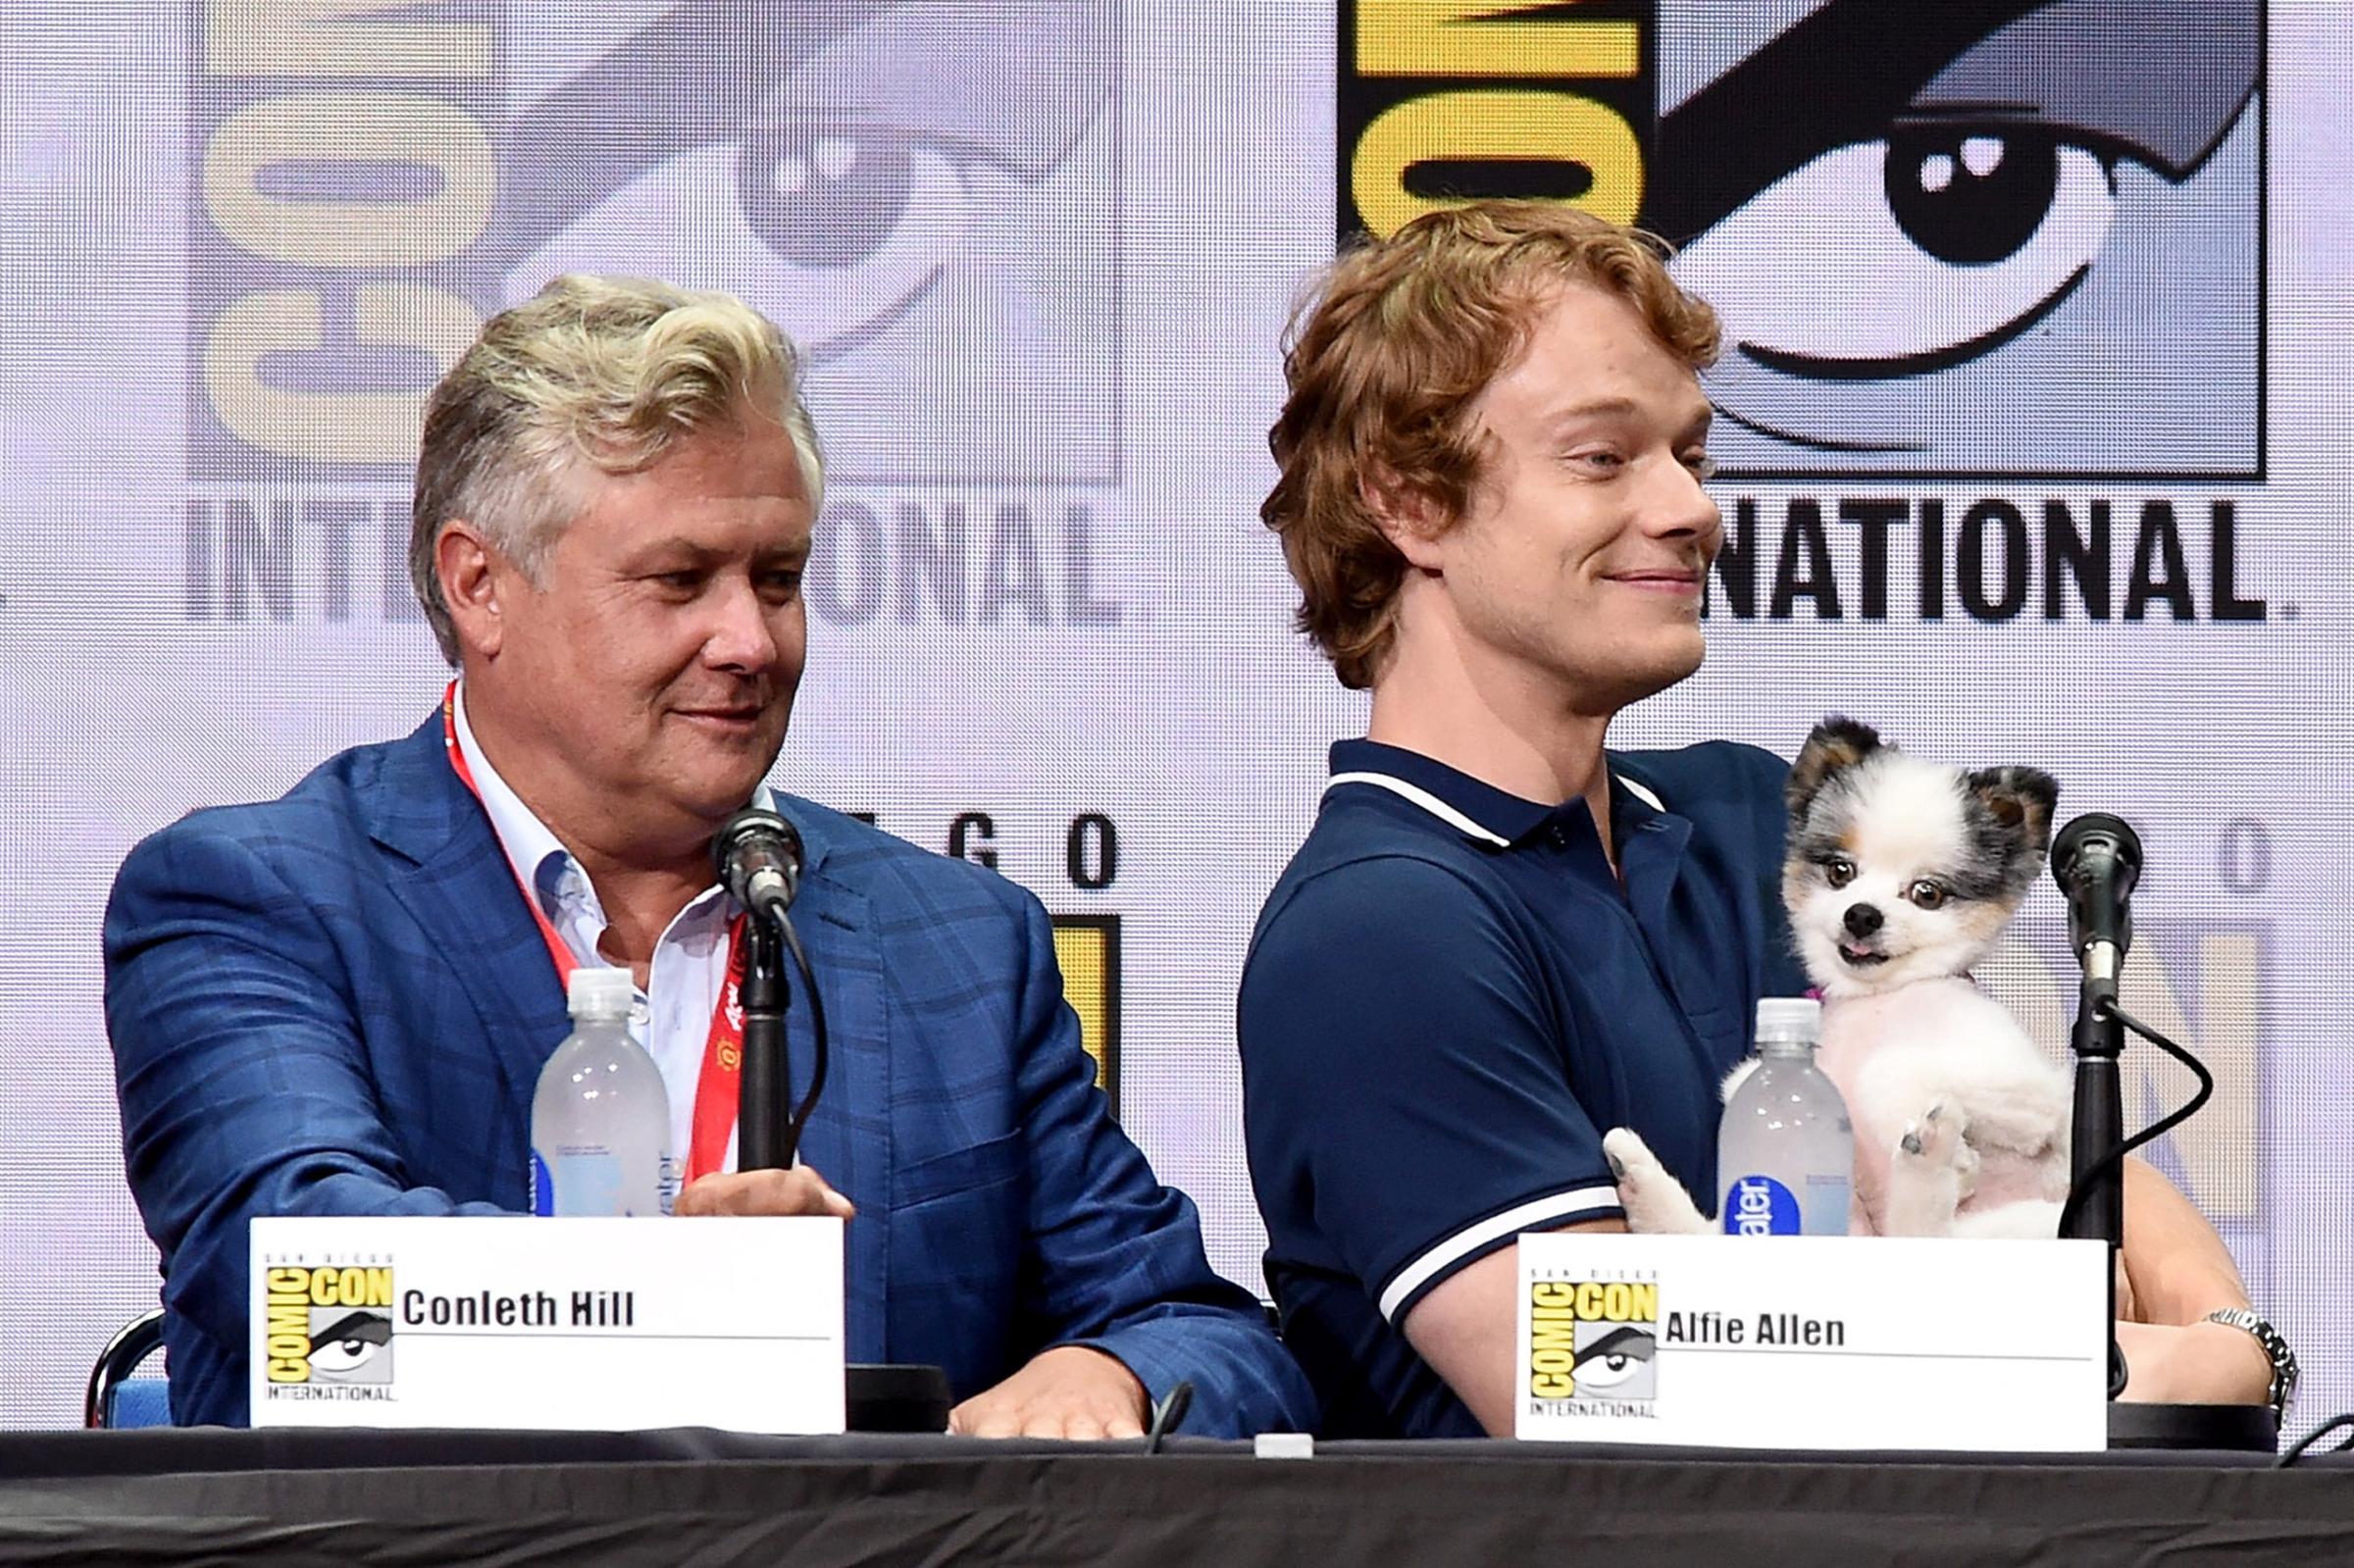 Comic-Con International 2017 - "Game Of Thrones" Panel And Q+A Session